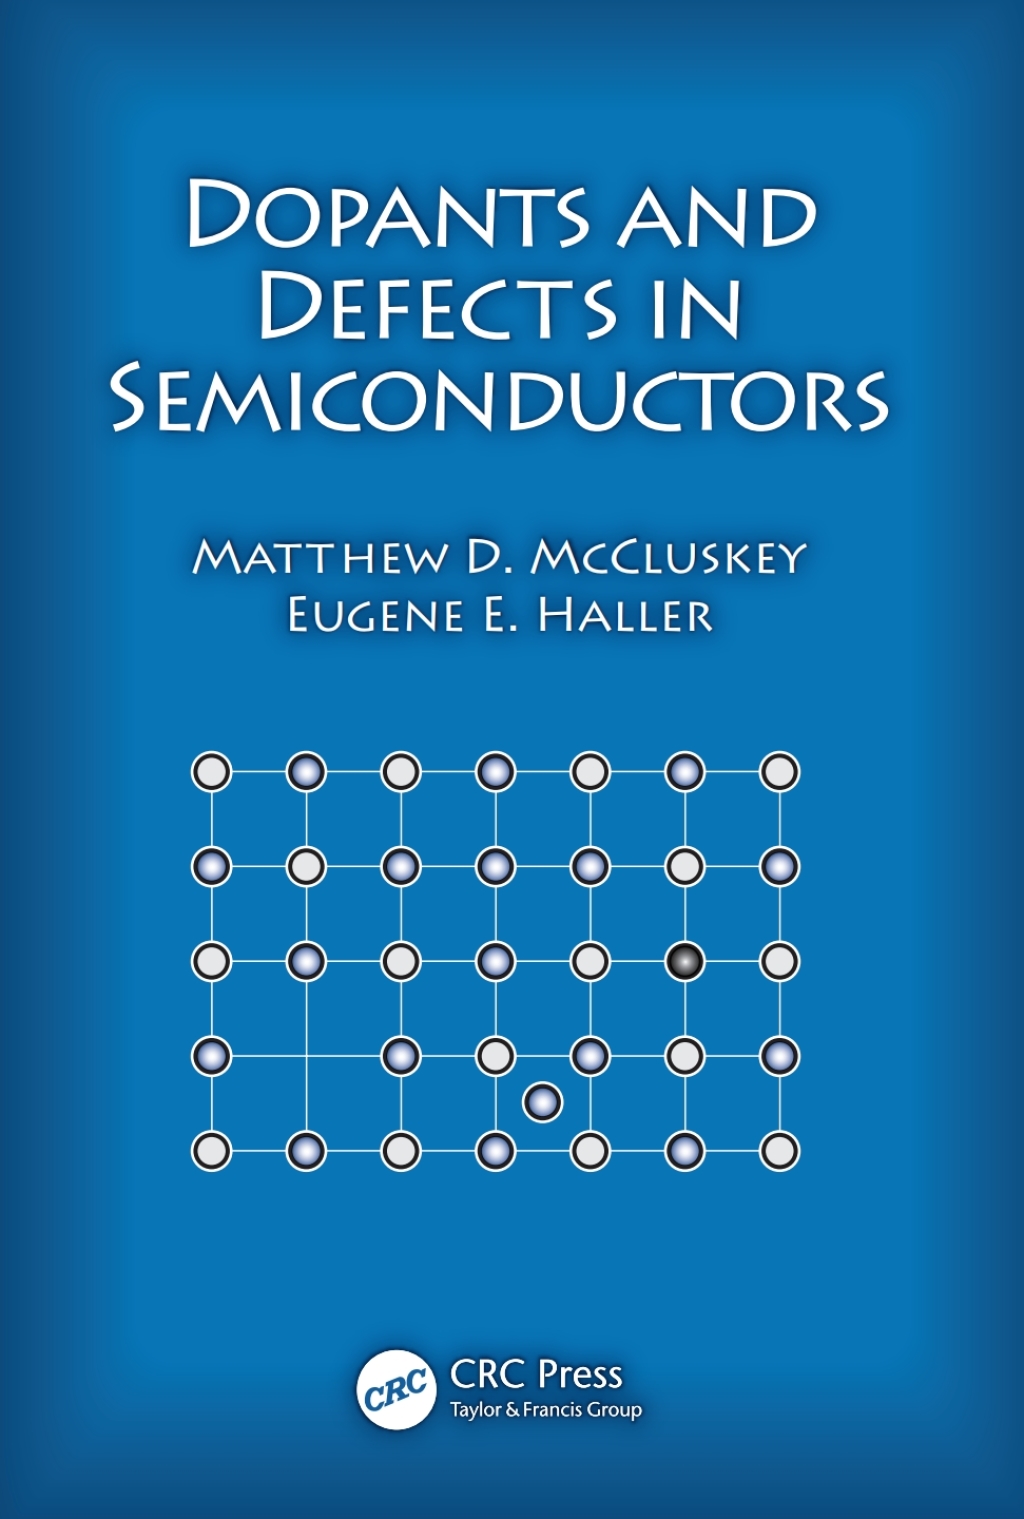 Dopants and Defects in Semiconductors (eBook) - Matthew D. McCluskey